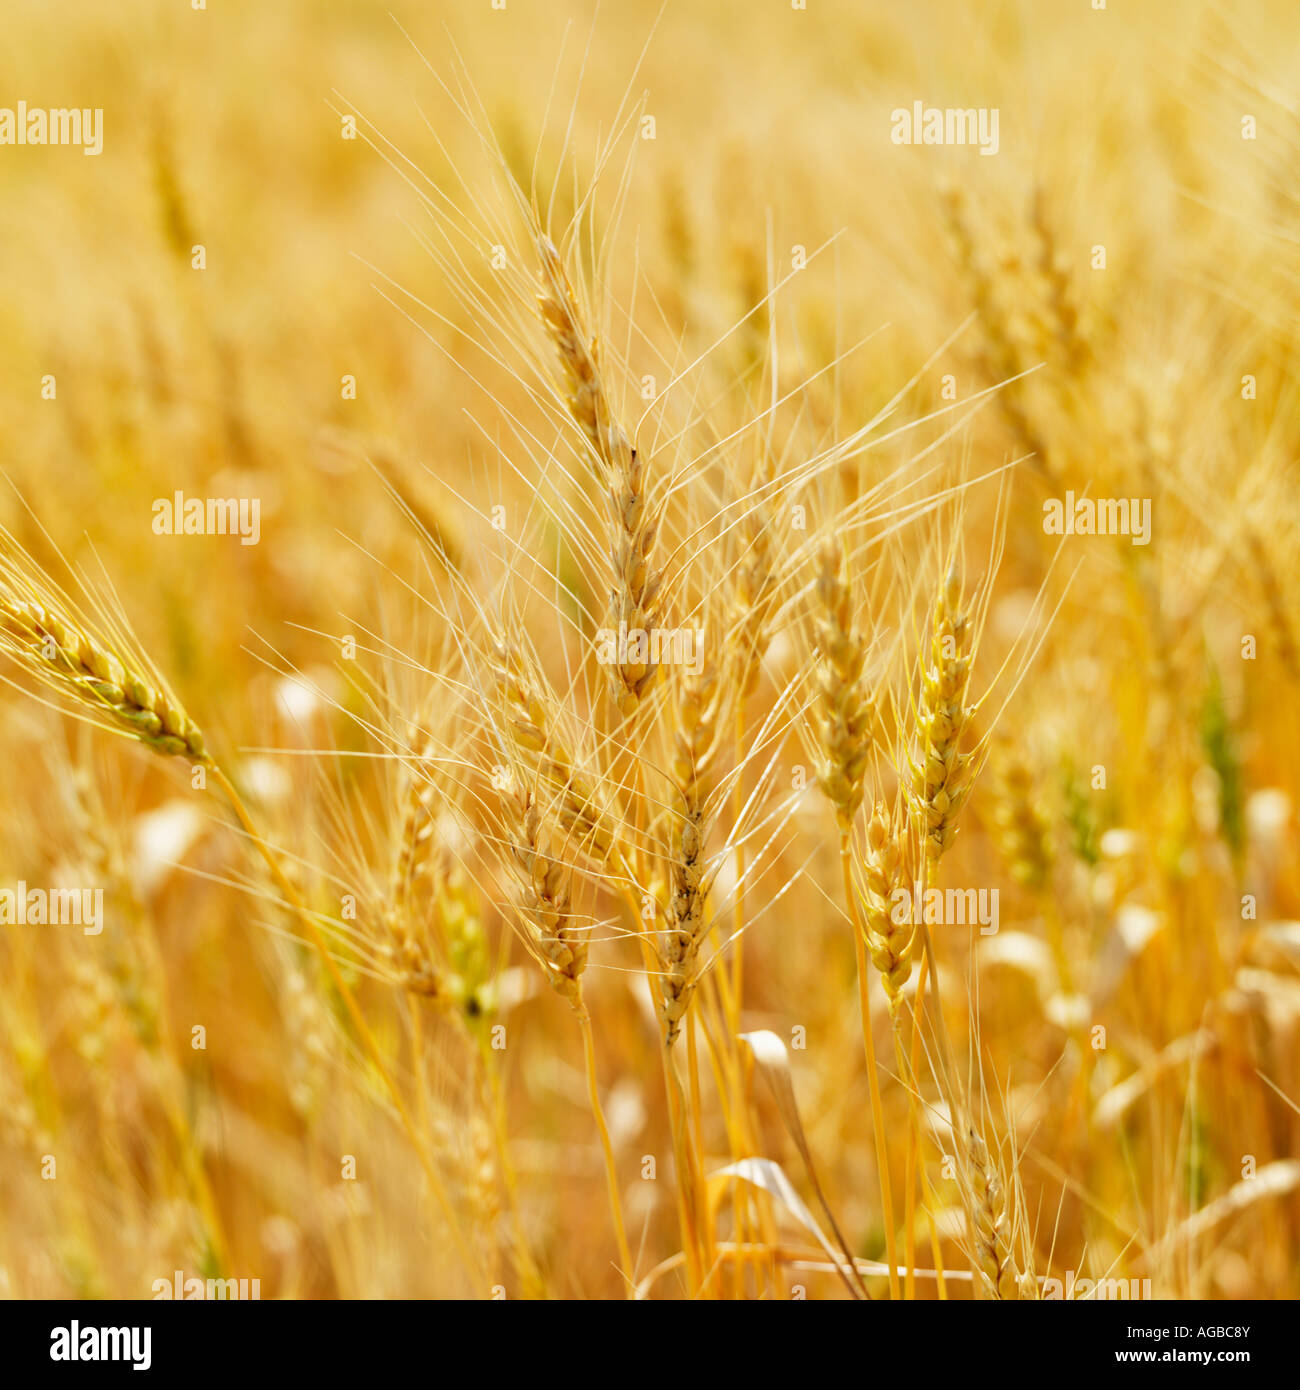 Golden field of wheat ready for harvest Stock Photo